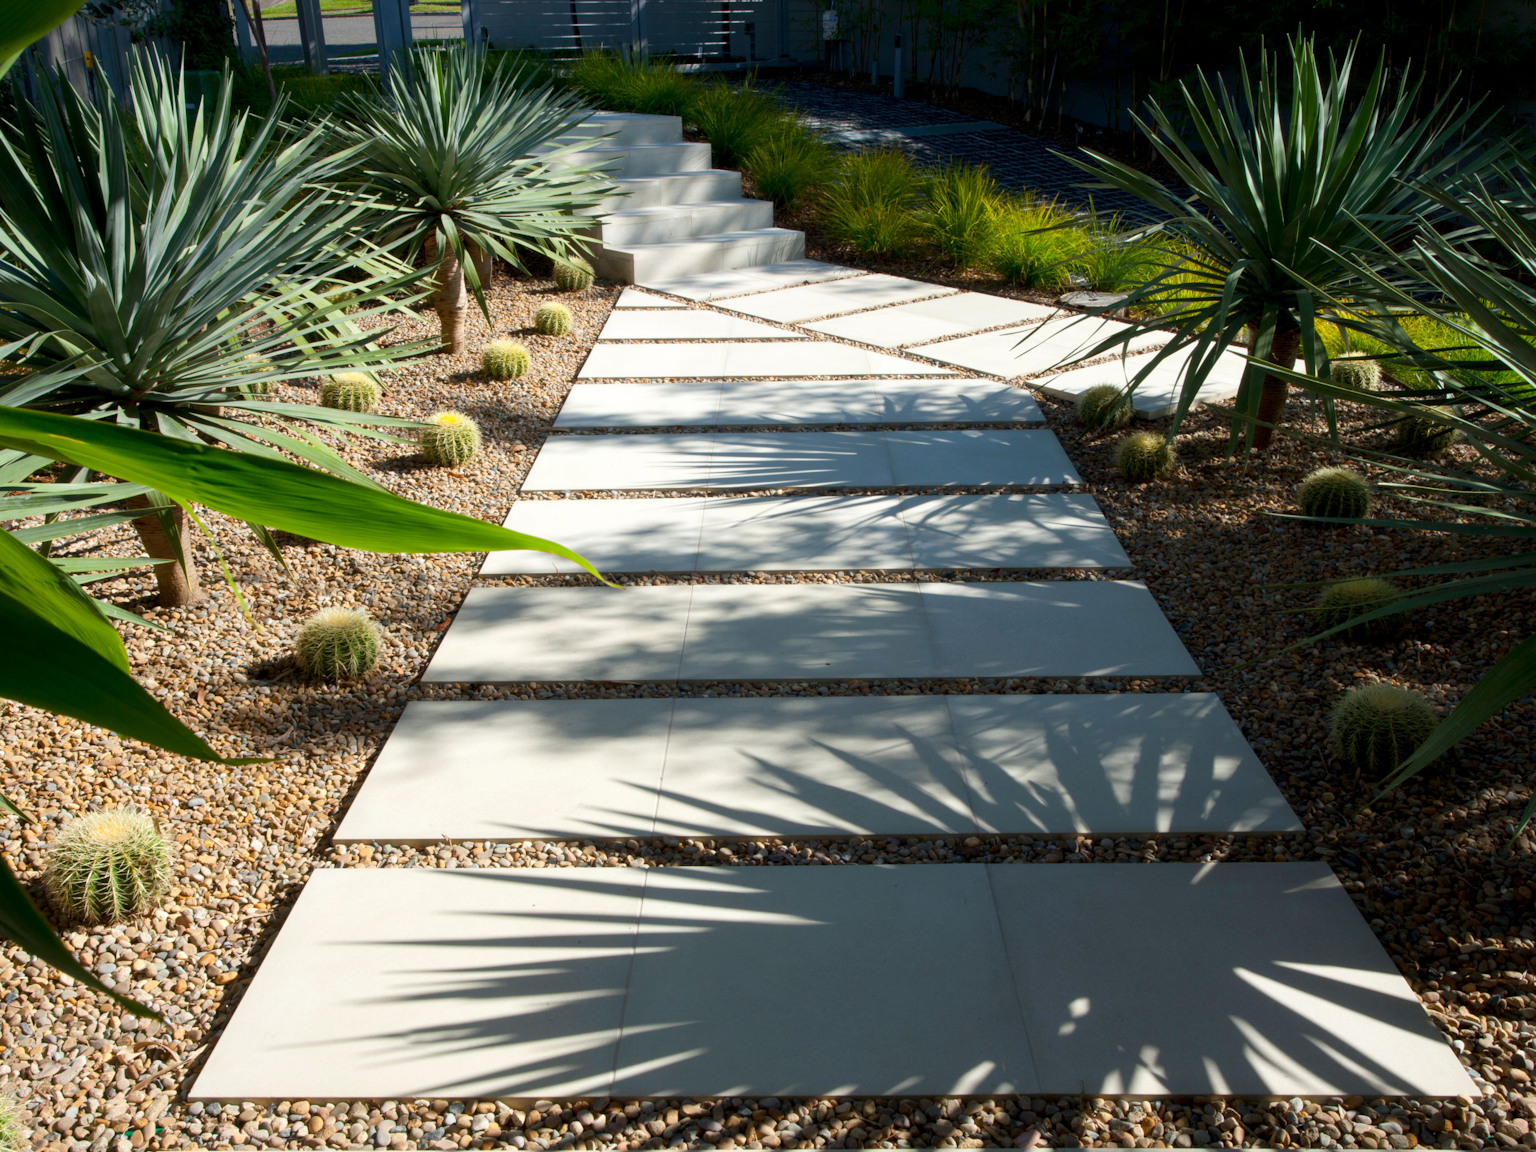 Low angle view of Cashmere concrete pavers used as stepping stones with loose pebbles through cactus garden